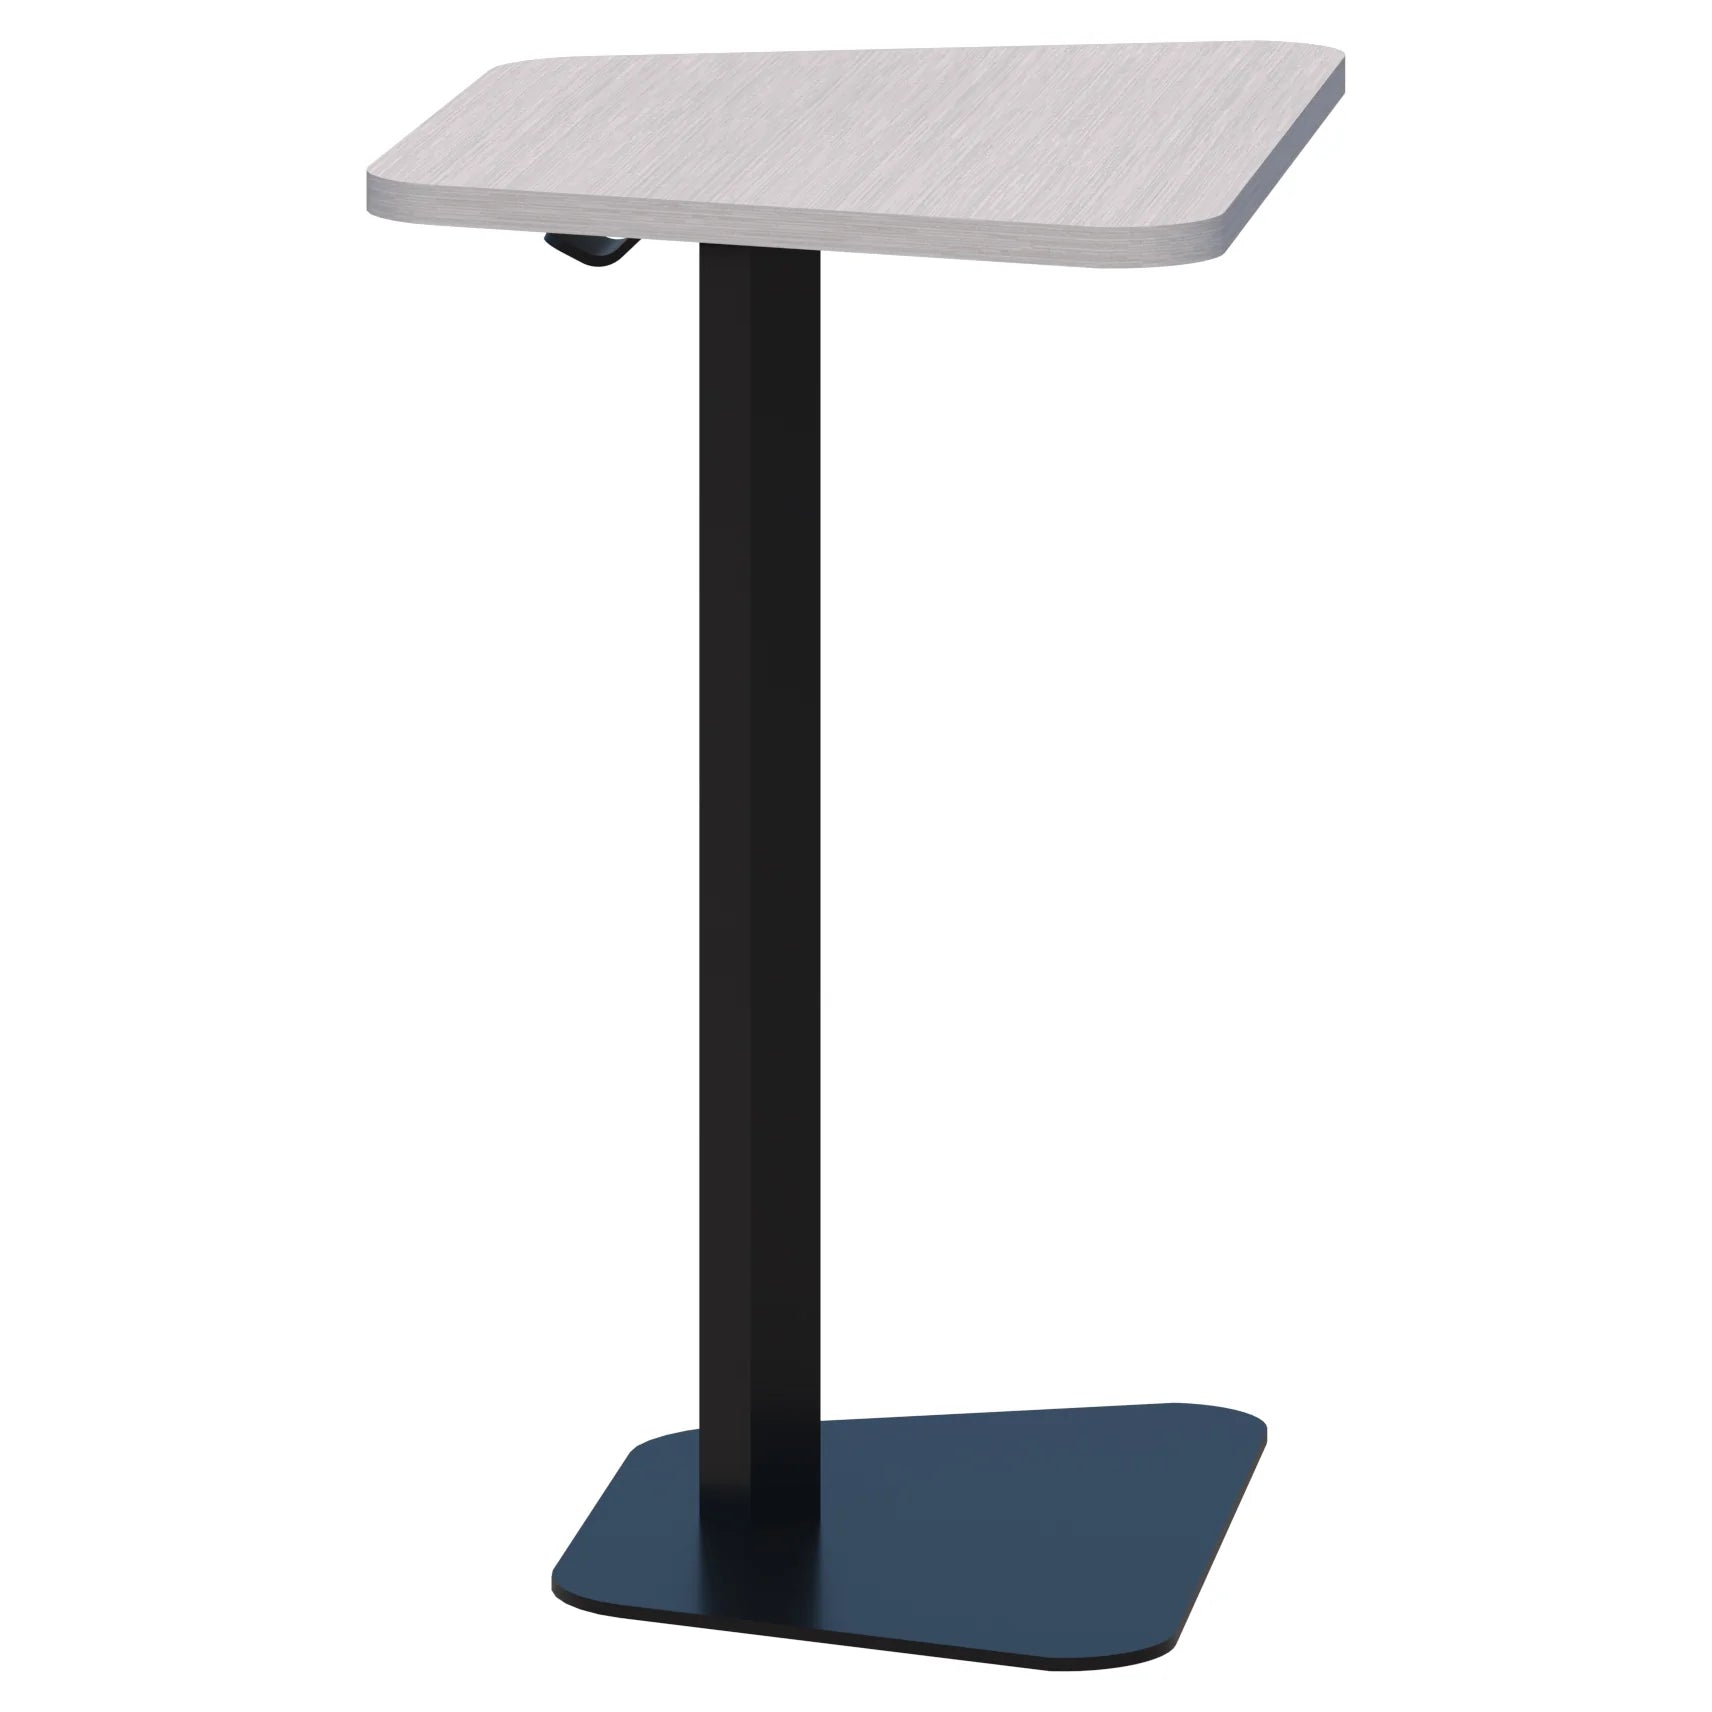 Memo laptop table with trapezium shaped top in silver strata and black pedestal base.